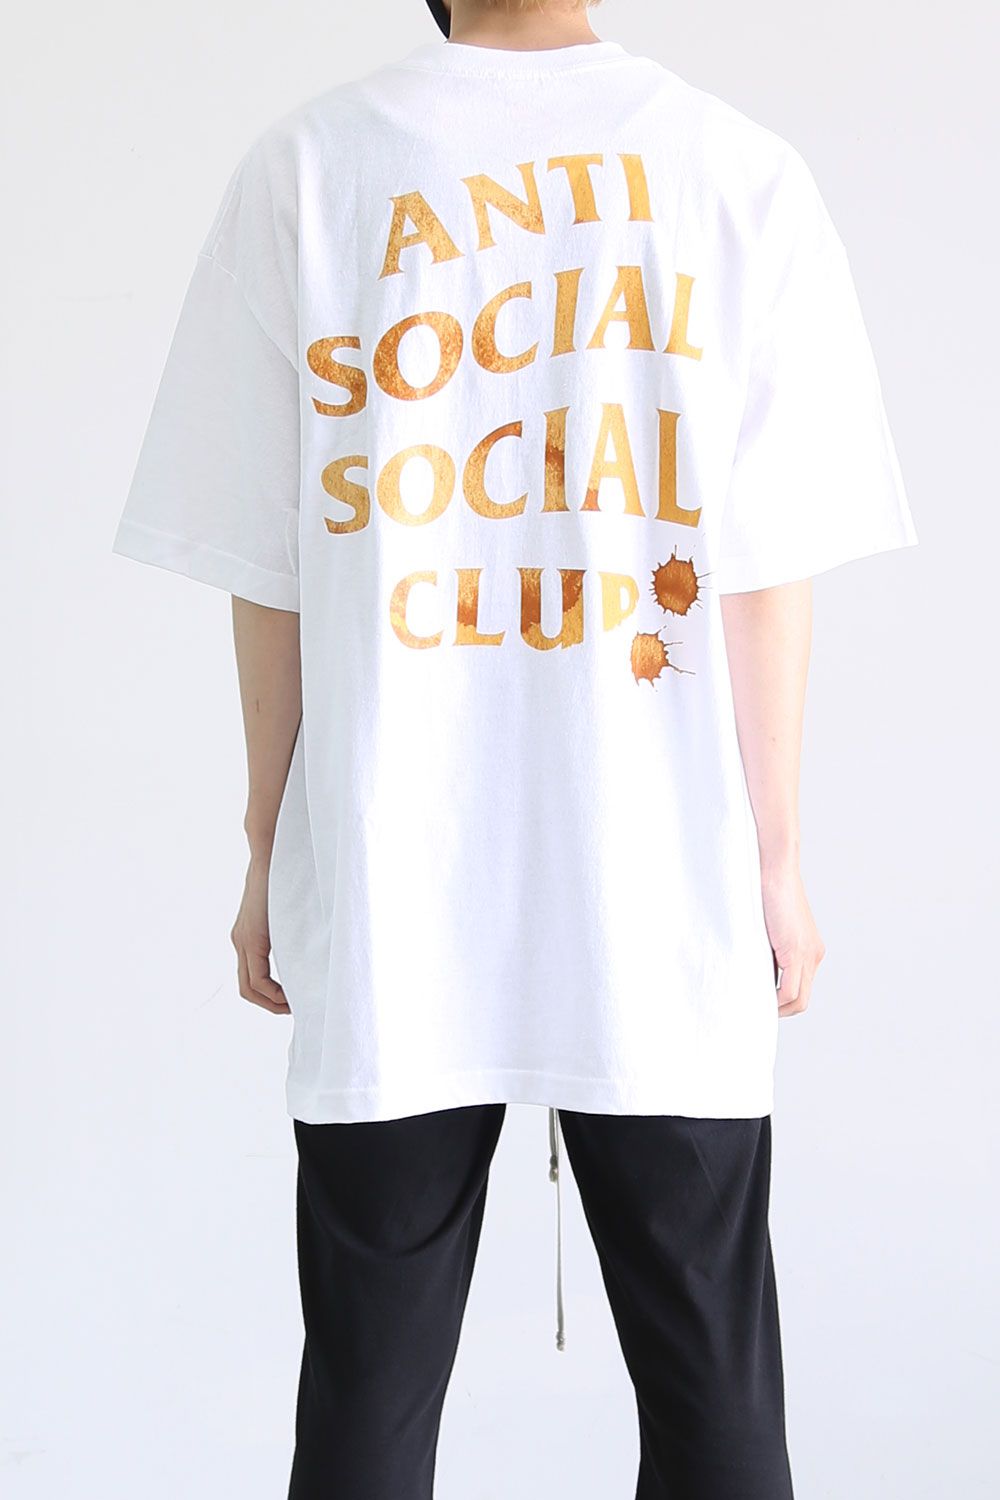 Anti Social Social Club - Every Morning , Every Time White Tee ...